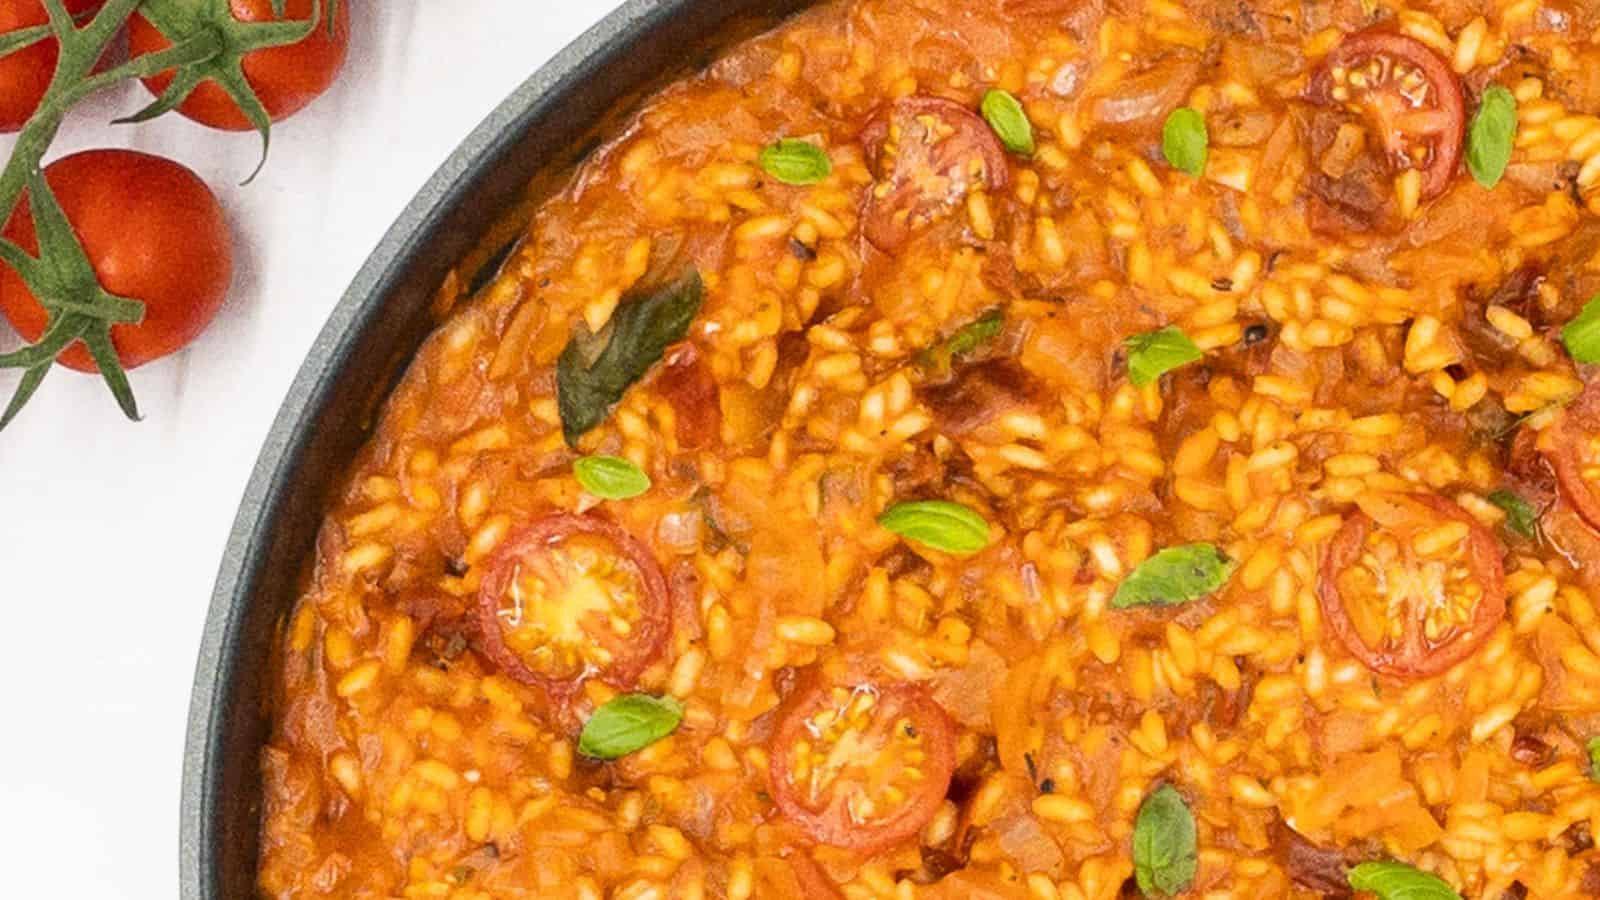 Risotto with tomatoes in a skillet.